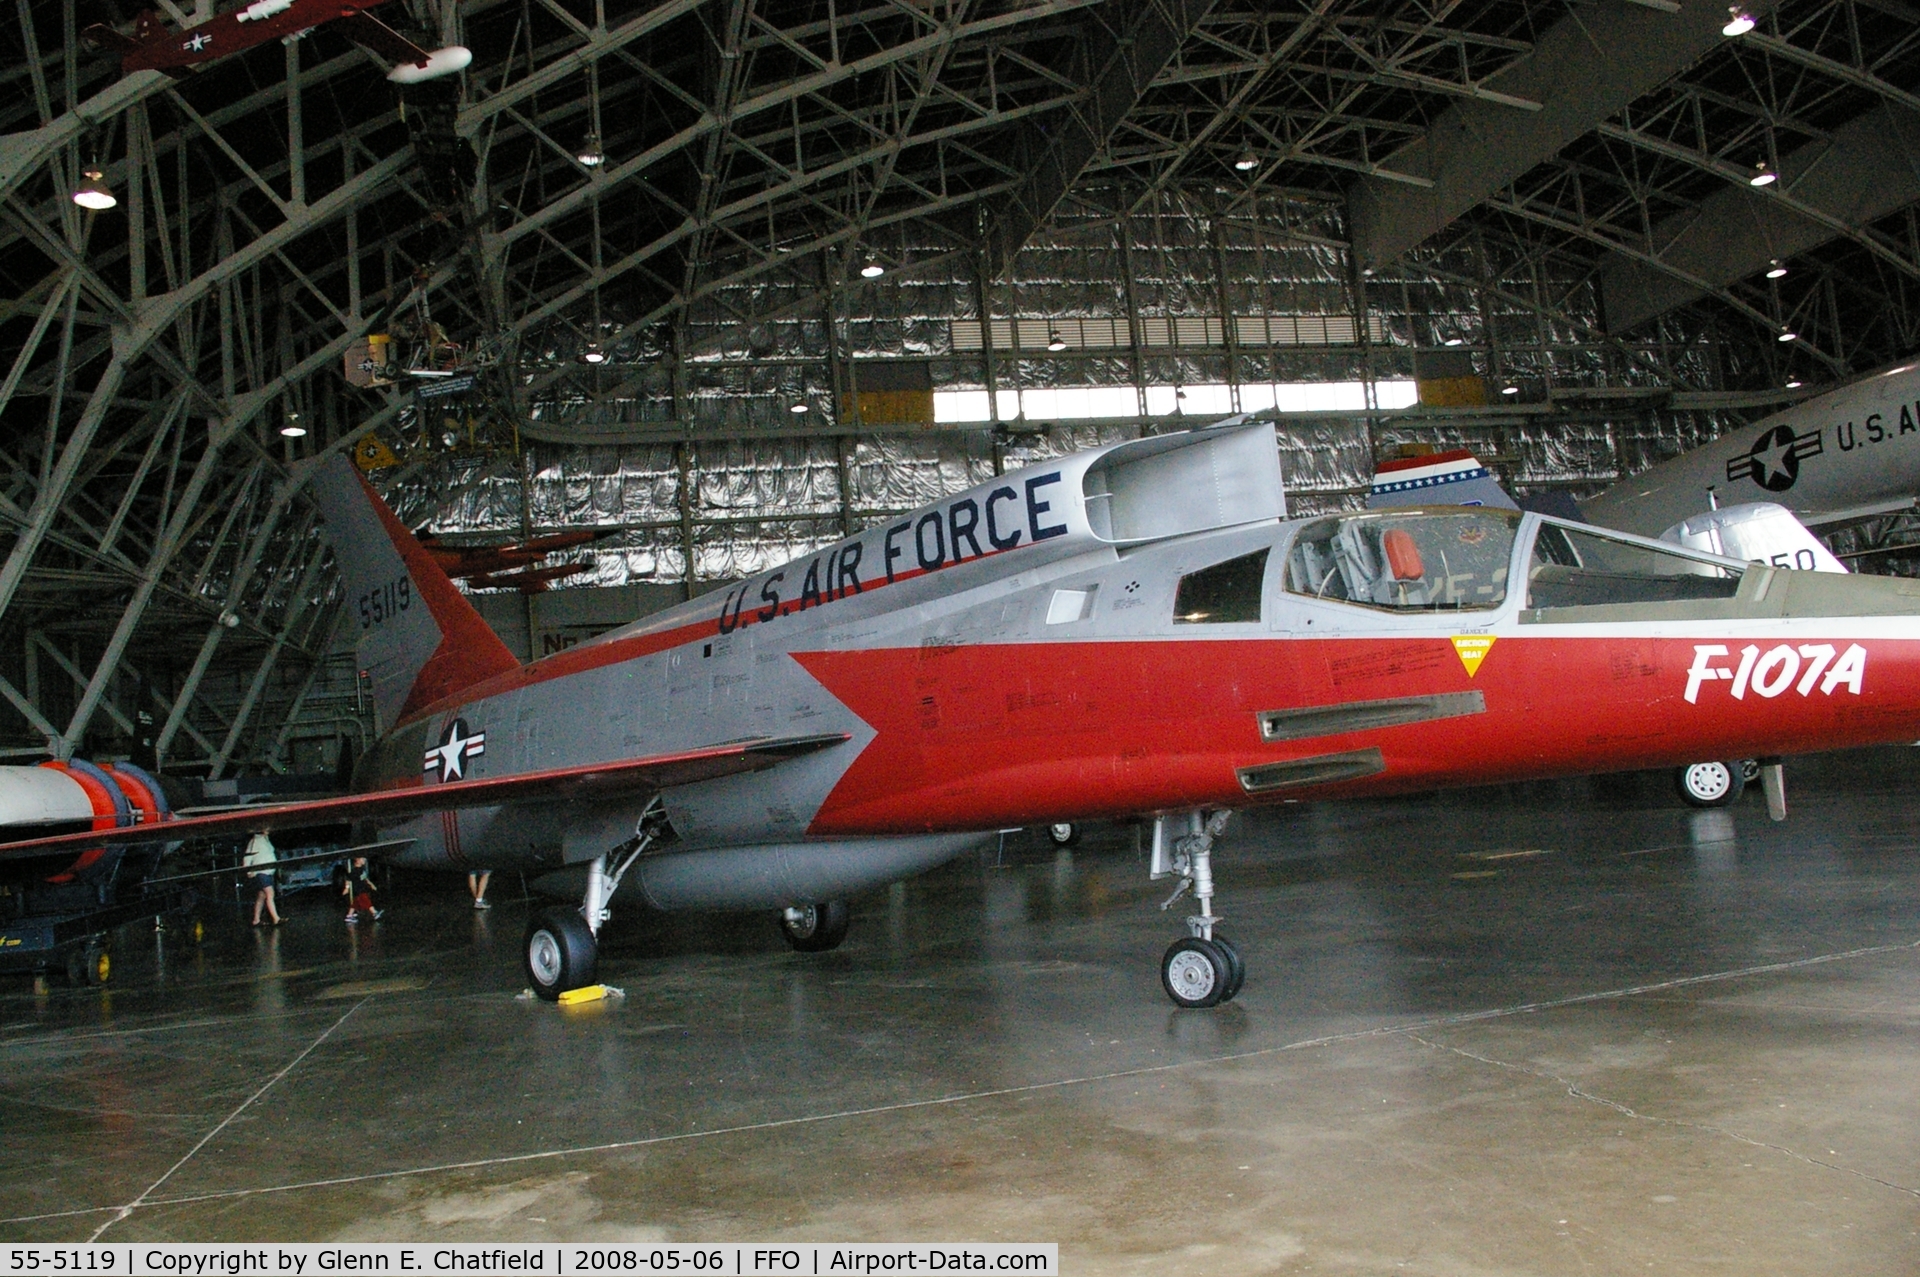 55-5119, 1955 North American F-107A C/N 212-2, Displayed at the National Museum of the U.S. Air Force